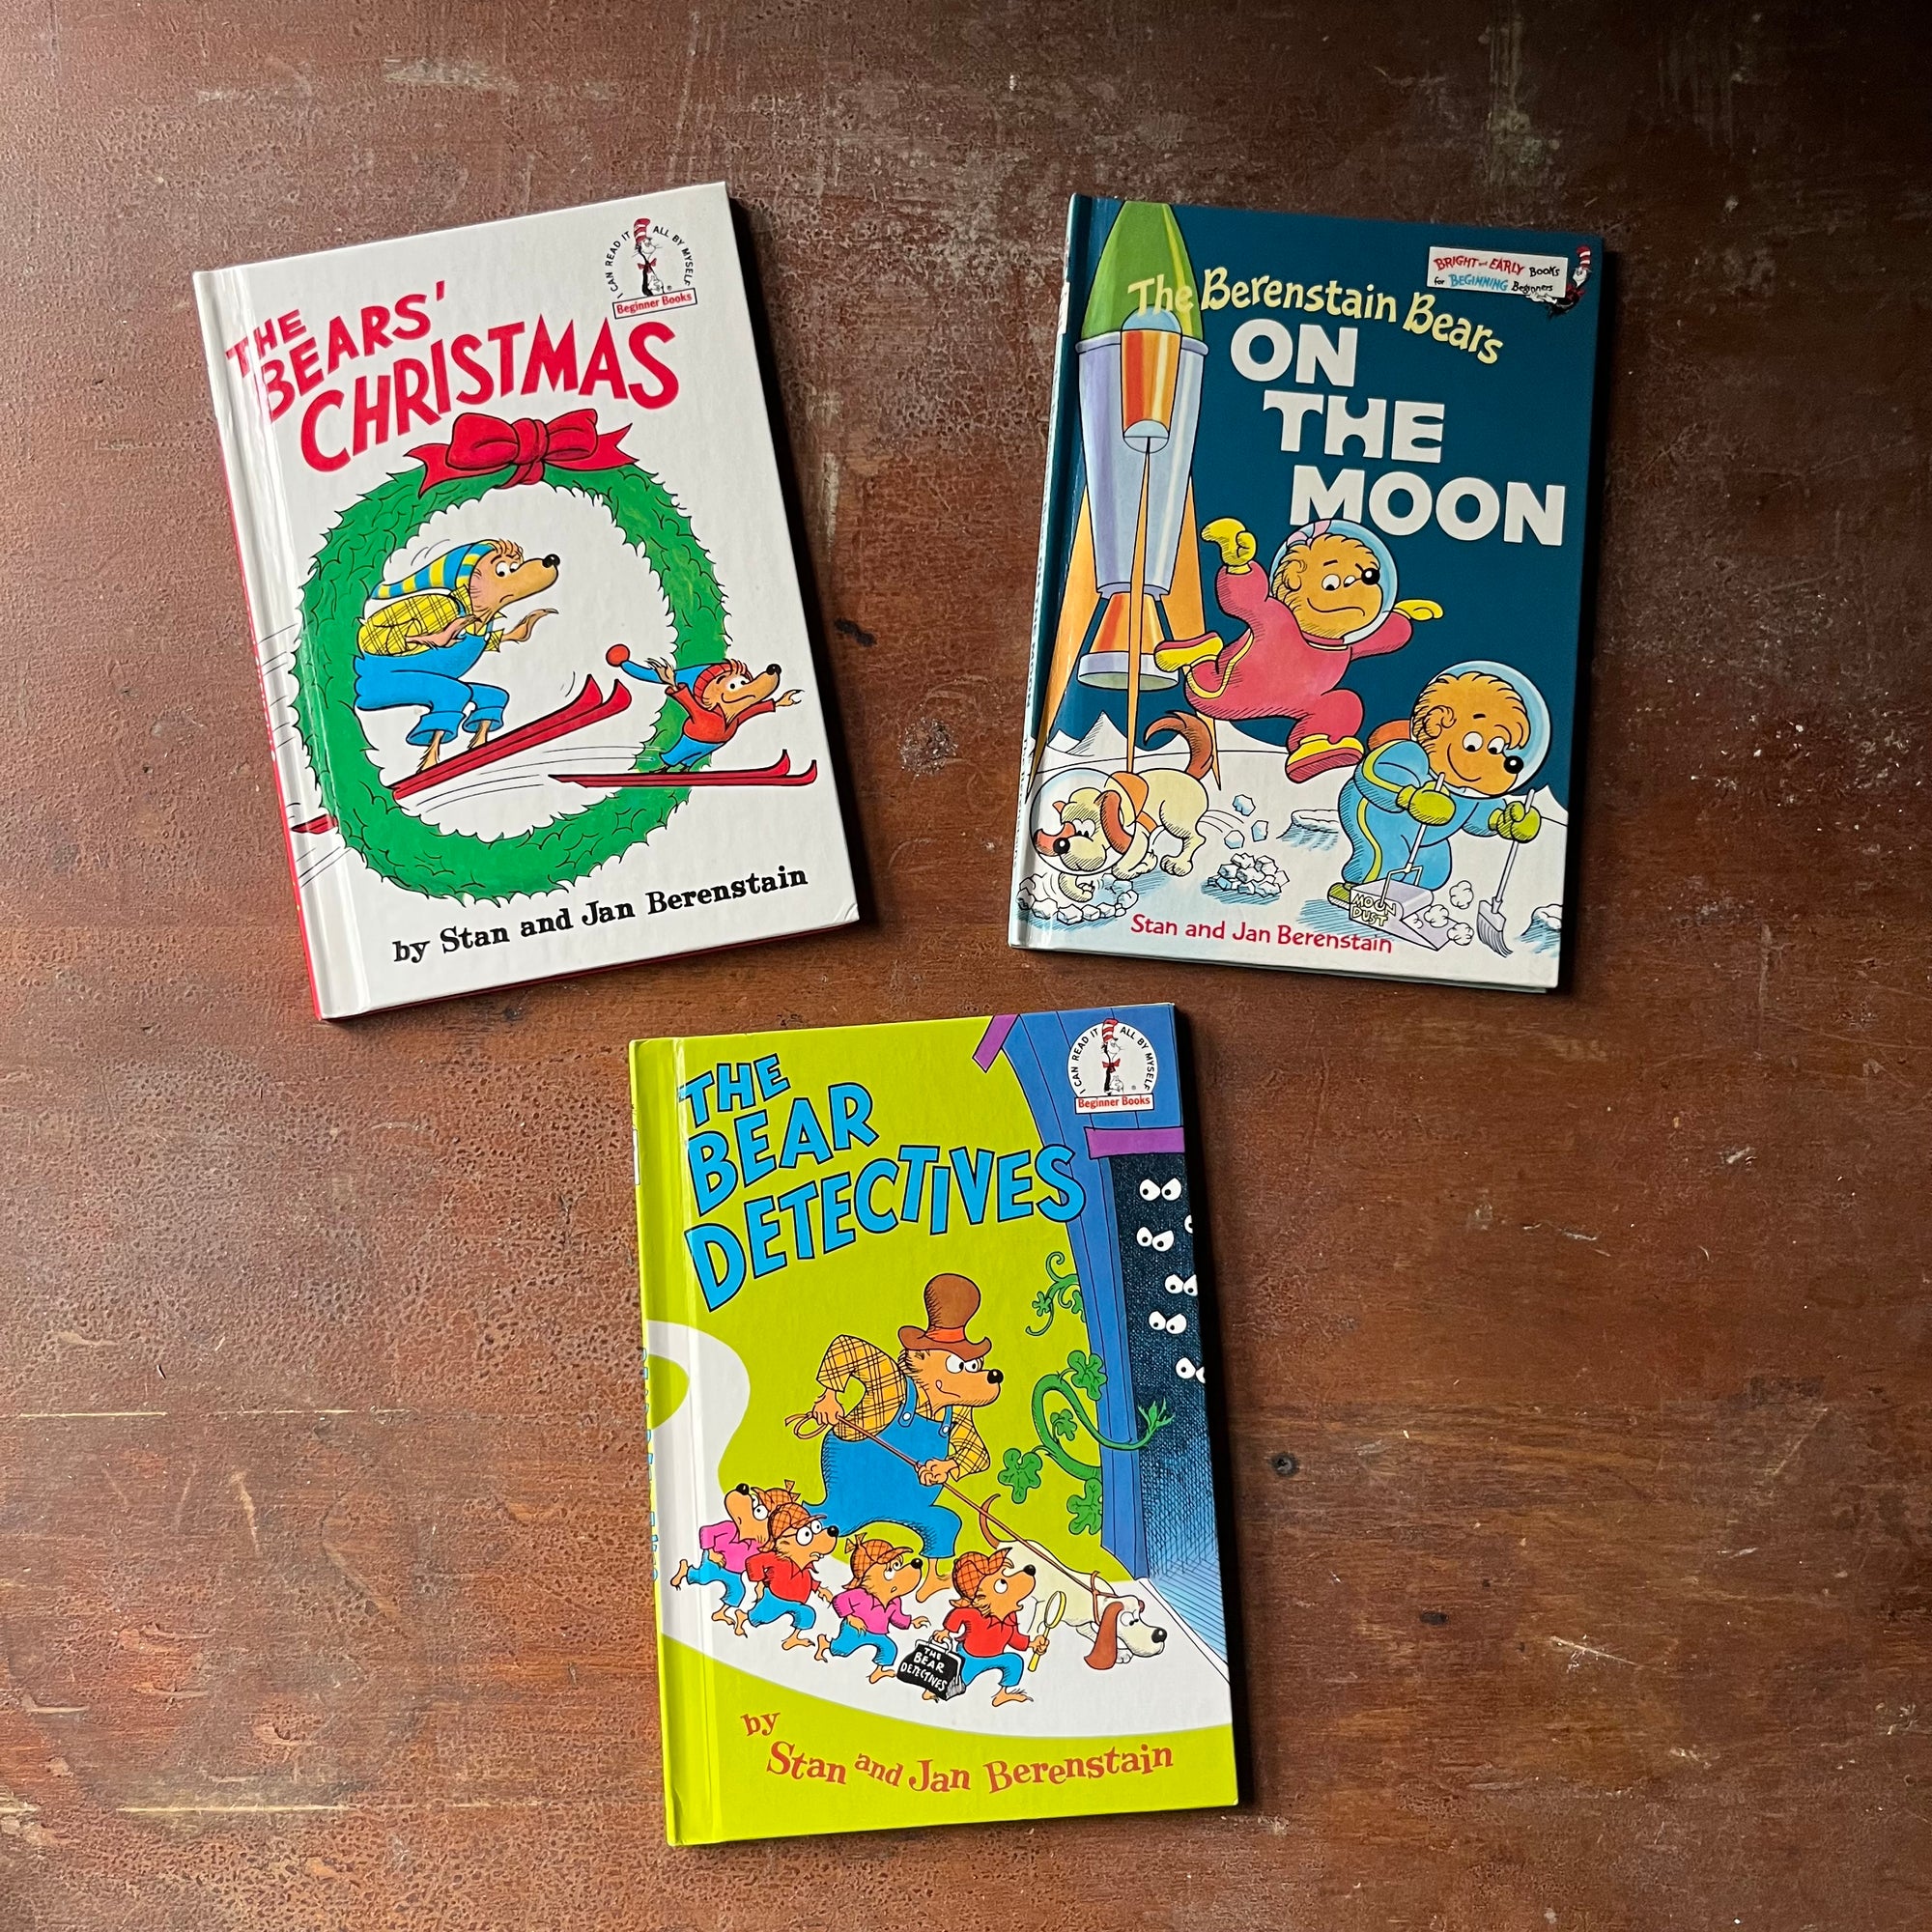 vintage picture books, I Can Read it All by Myself Beginner Books - Berenstain Bears Book Set: The Bear Detectives, The Berenstain Bears on the Moon & The Bears' Christmas - stories and pictures by Jan & Stan Berenstain - view of the glossy front covers